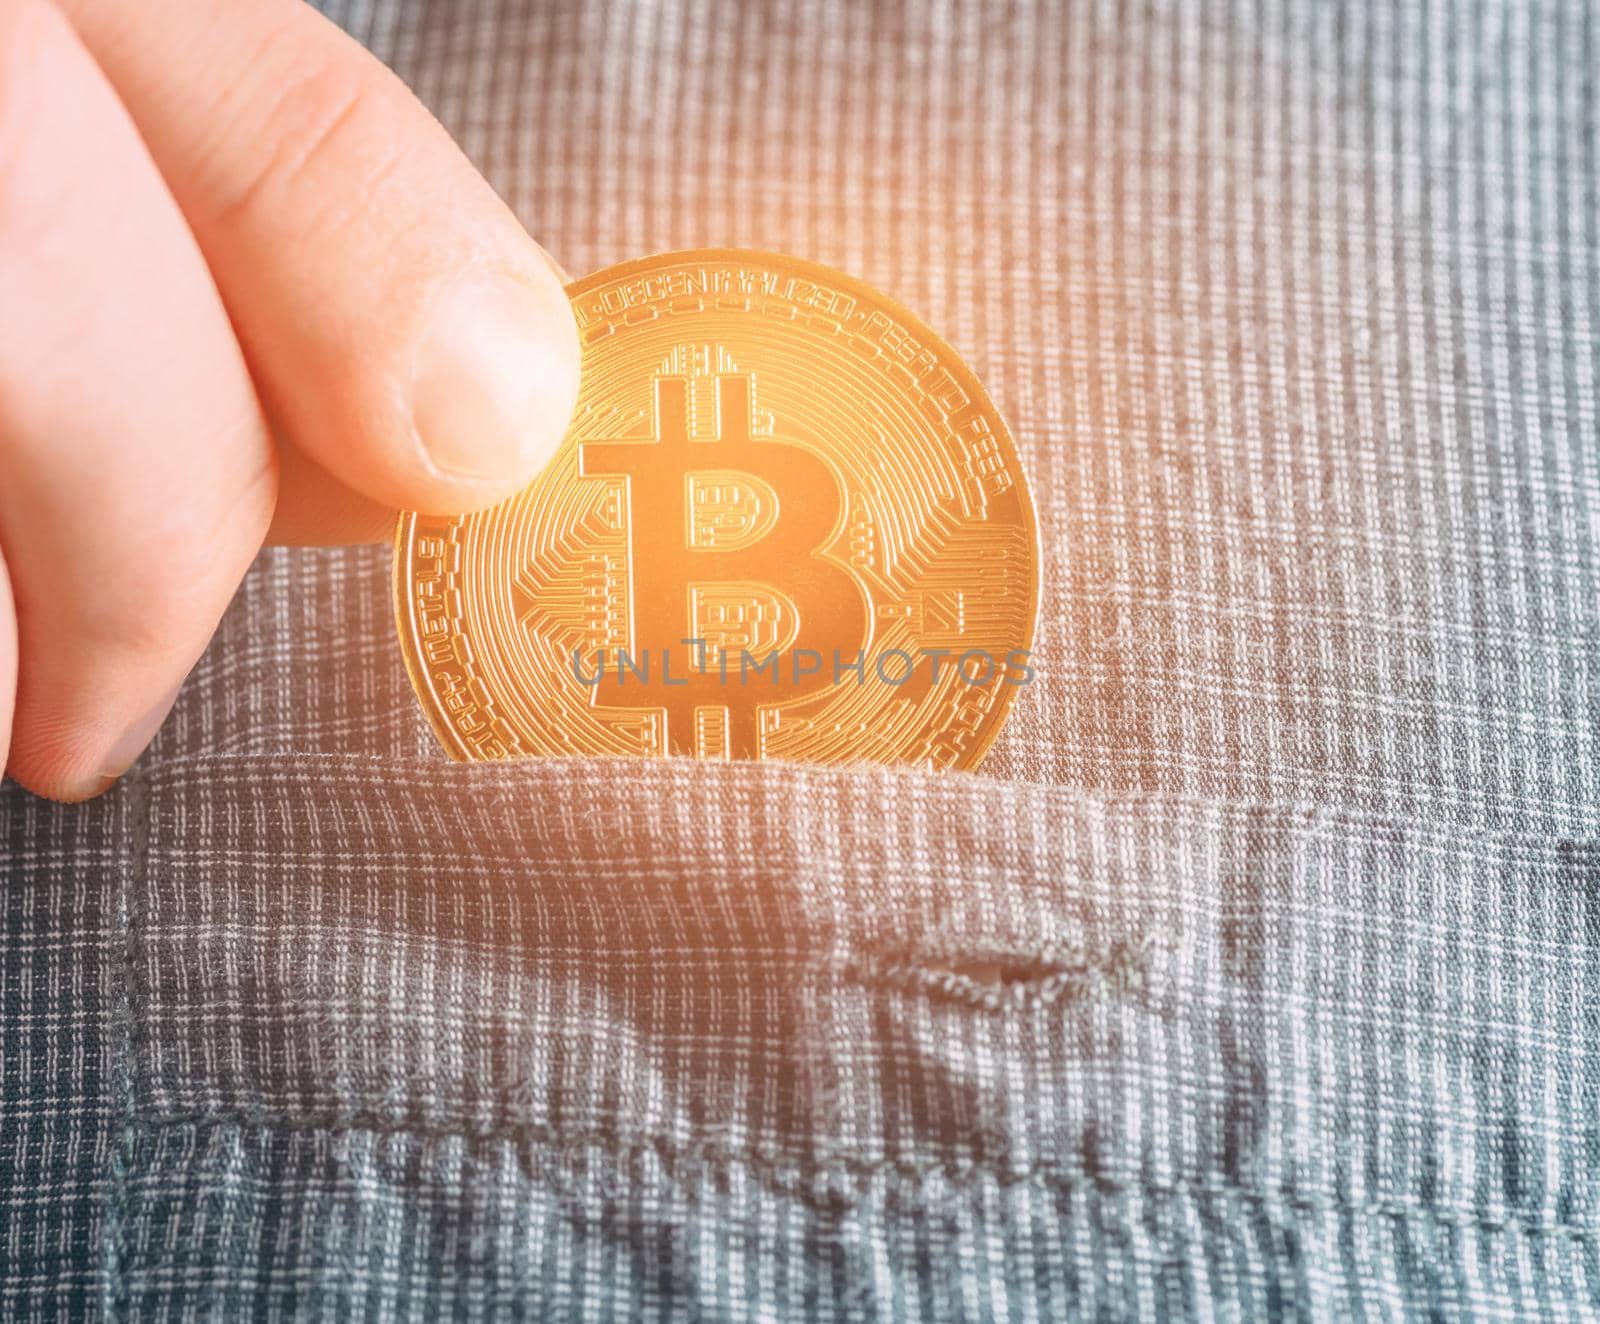 Hand putting glowing gold bitcoin into pocket of shirt, symbol of crypto currency and virtual money, close-up.